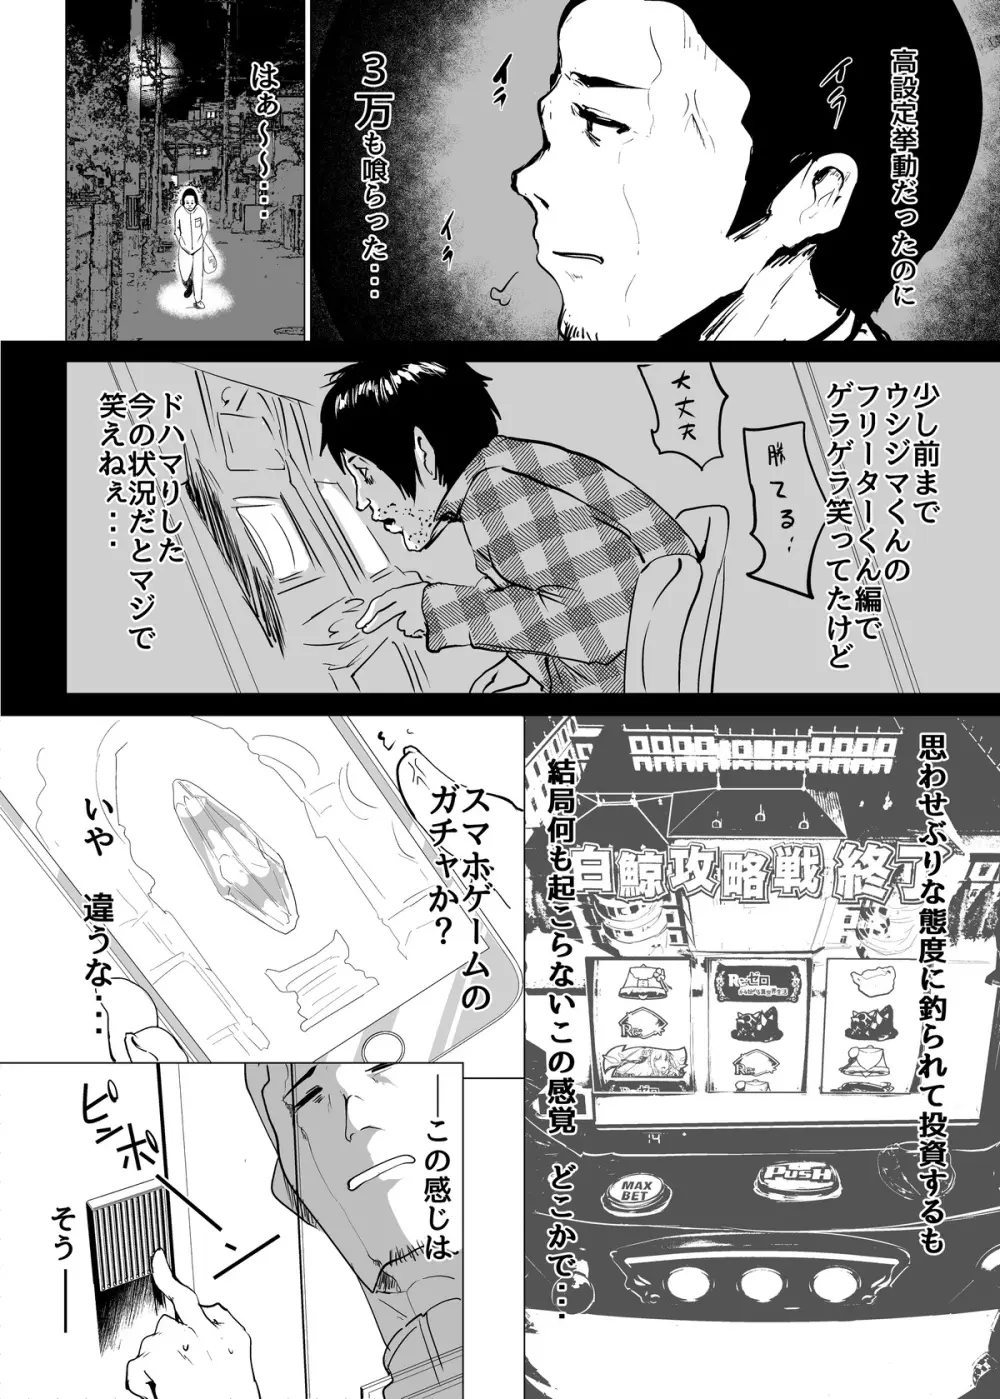 Re:ゼロから始めるパチスロ生活 - page3